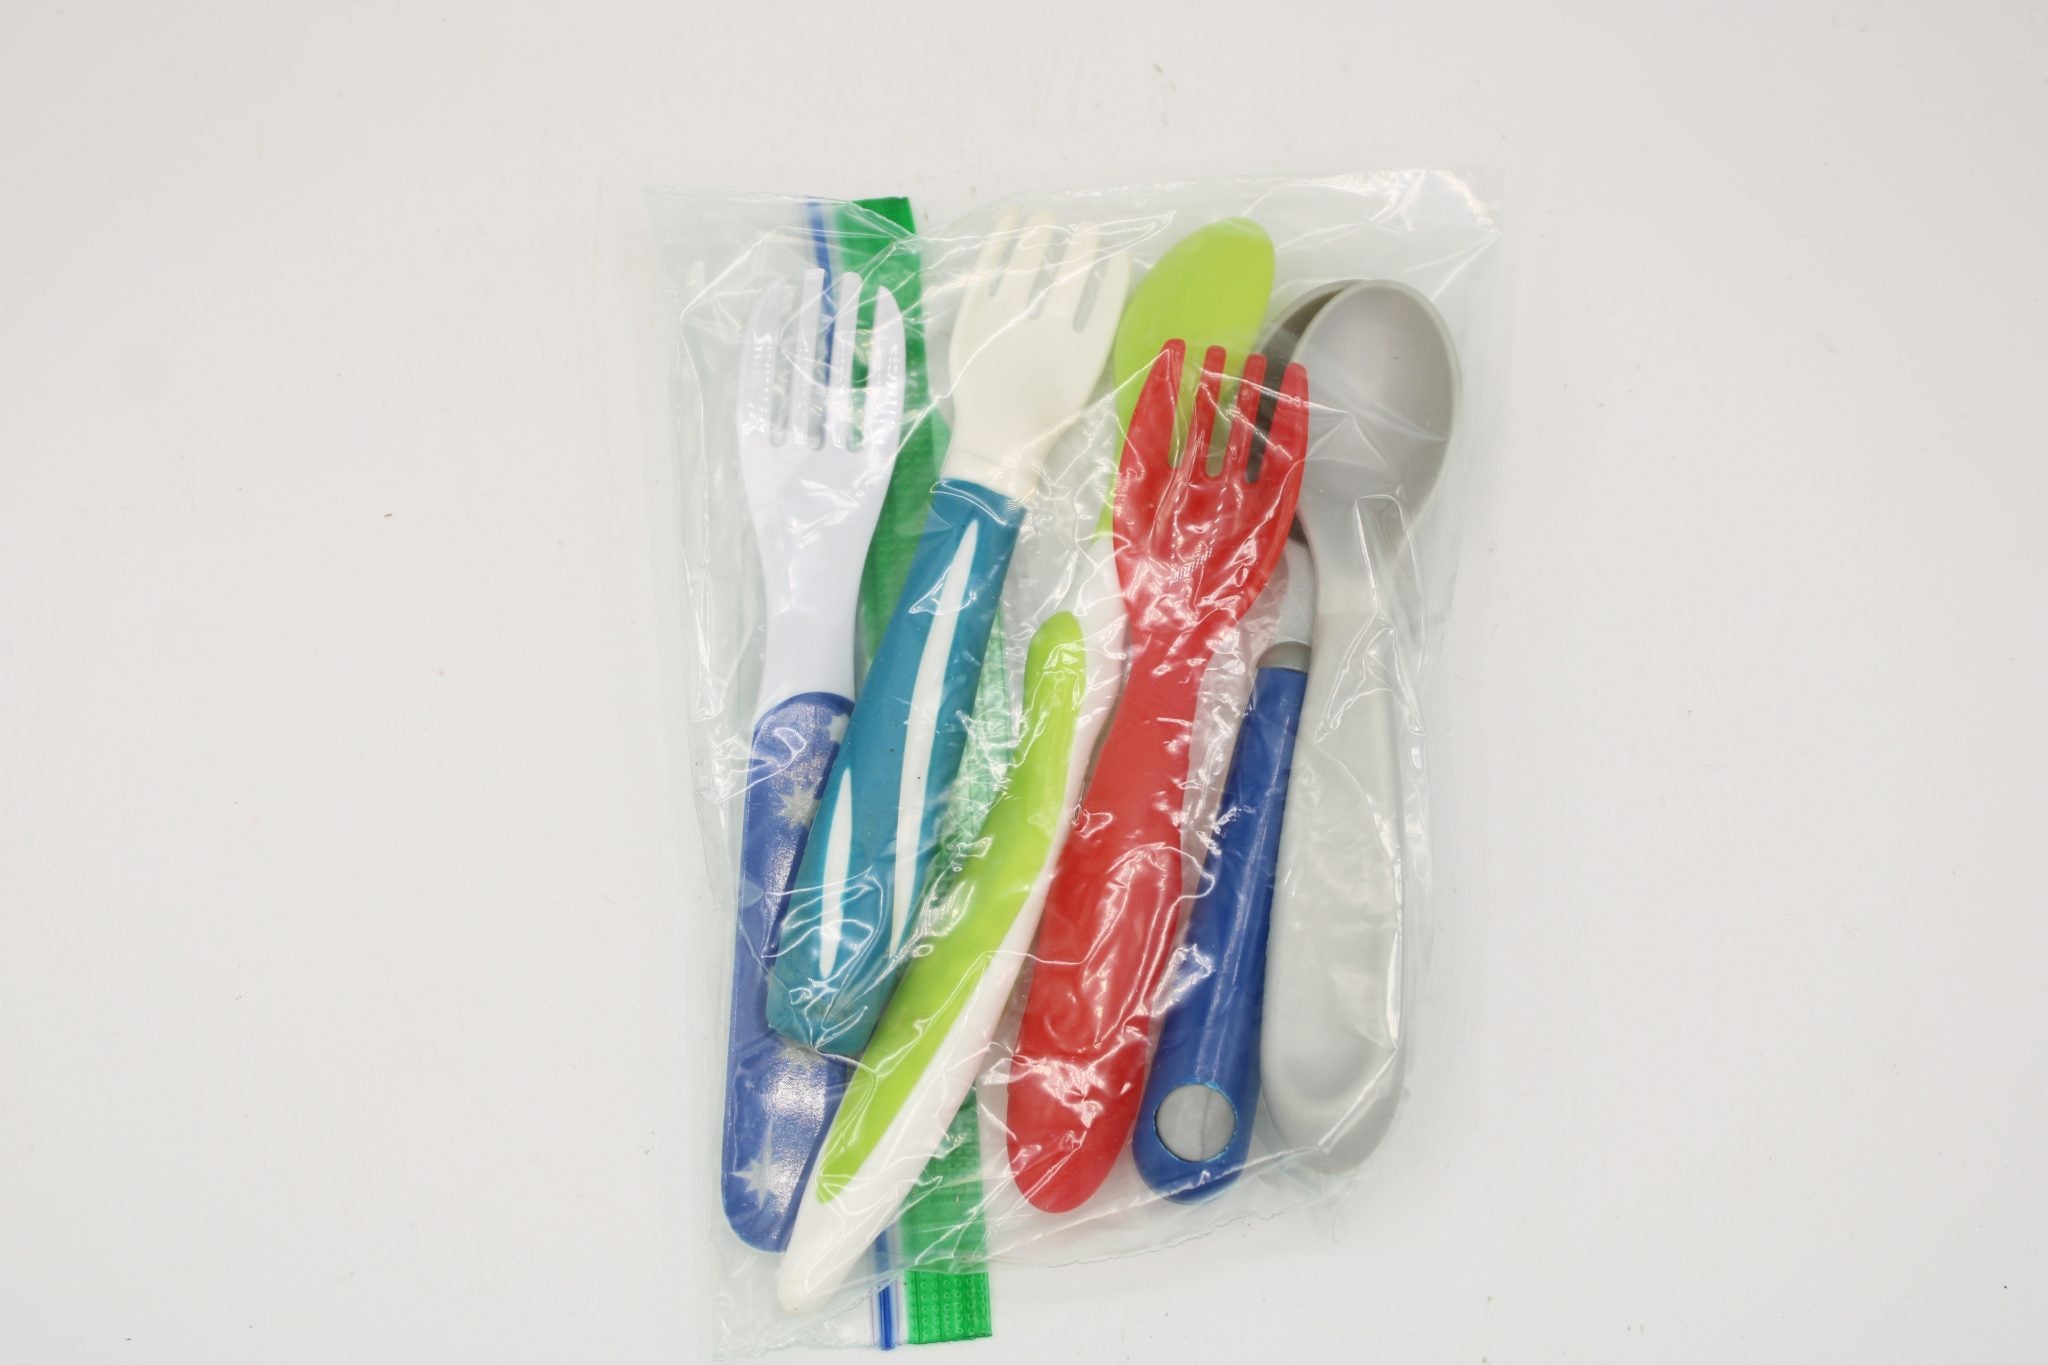 Assortment of Plastic Baby/Toddler Forks and Spoons